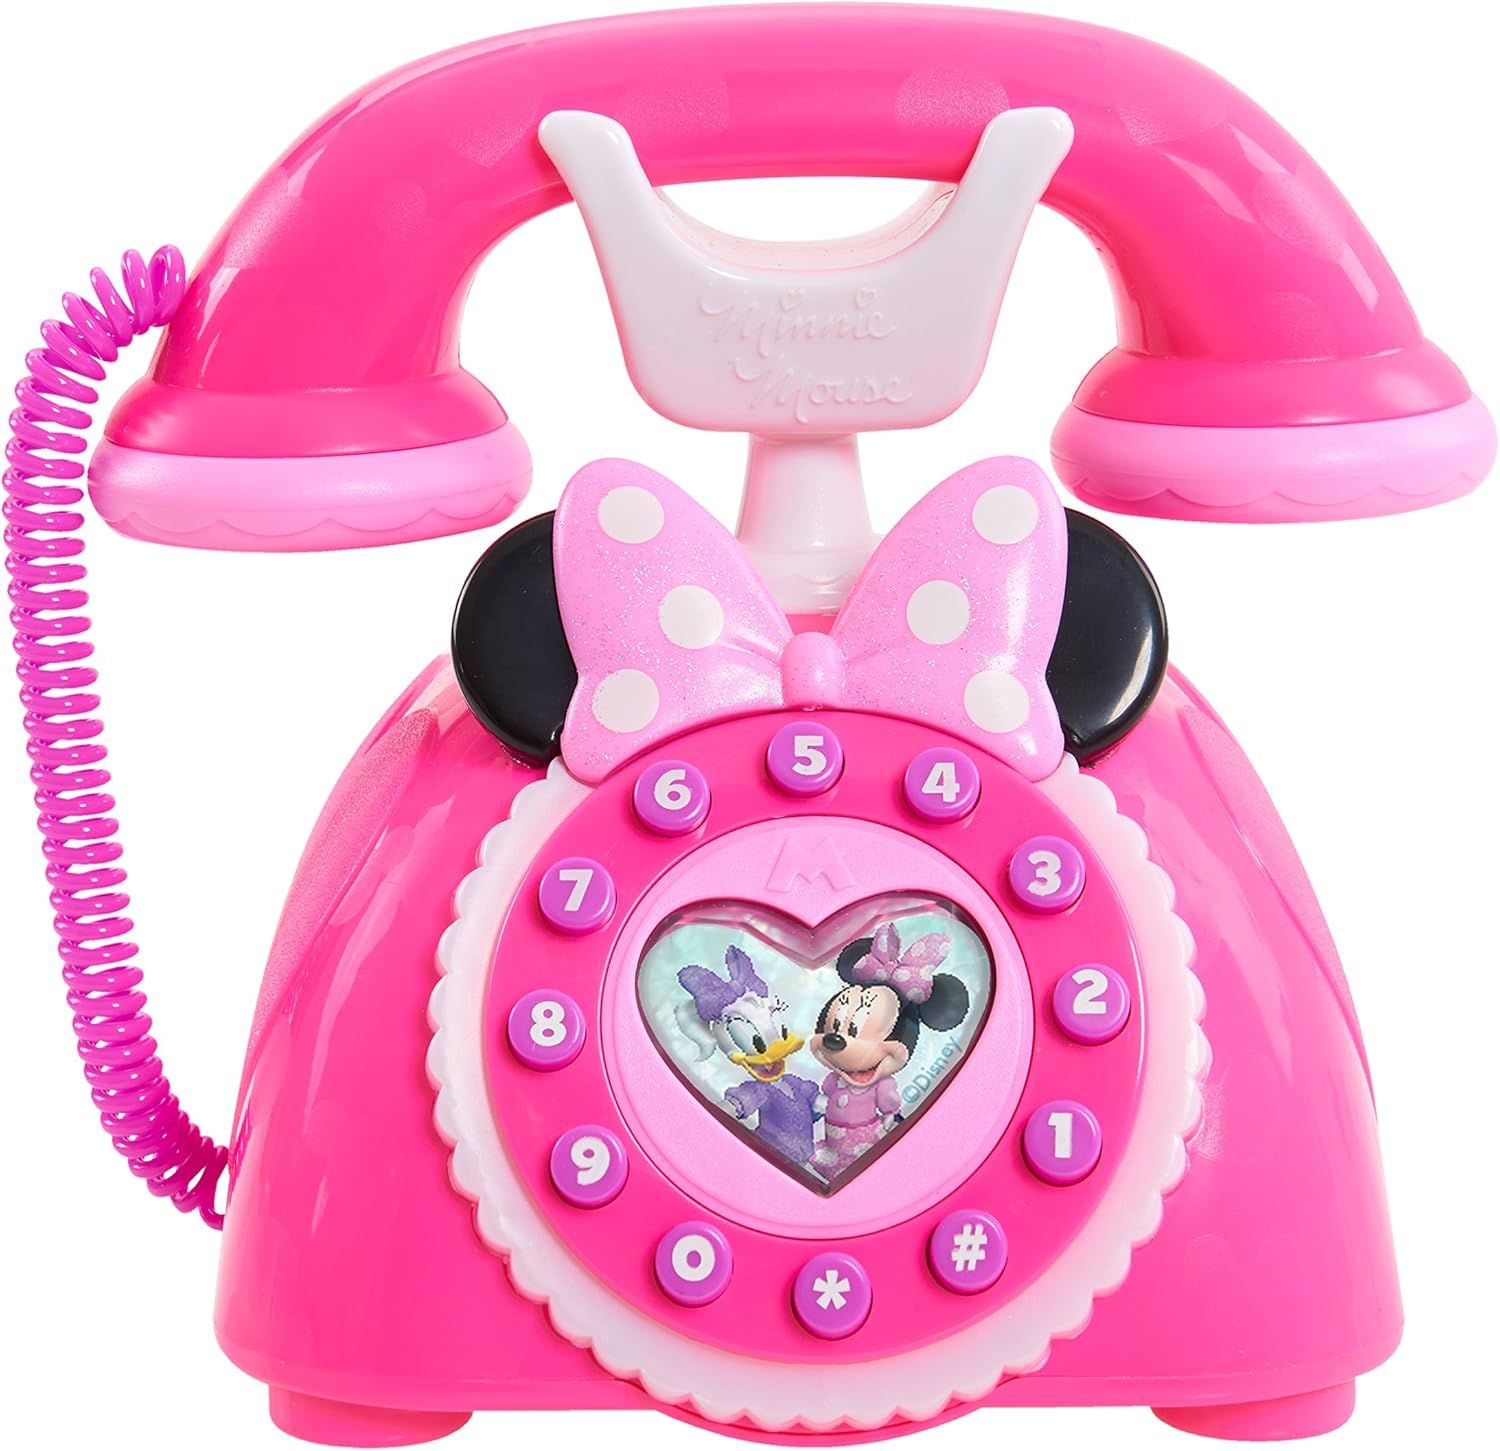 Minnie's Happy Helpers Rotary Phone, Styles May Vary, by Just Play | Amazon (US)